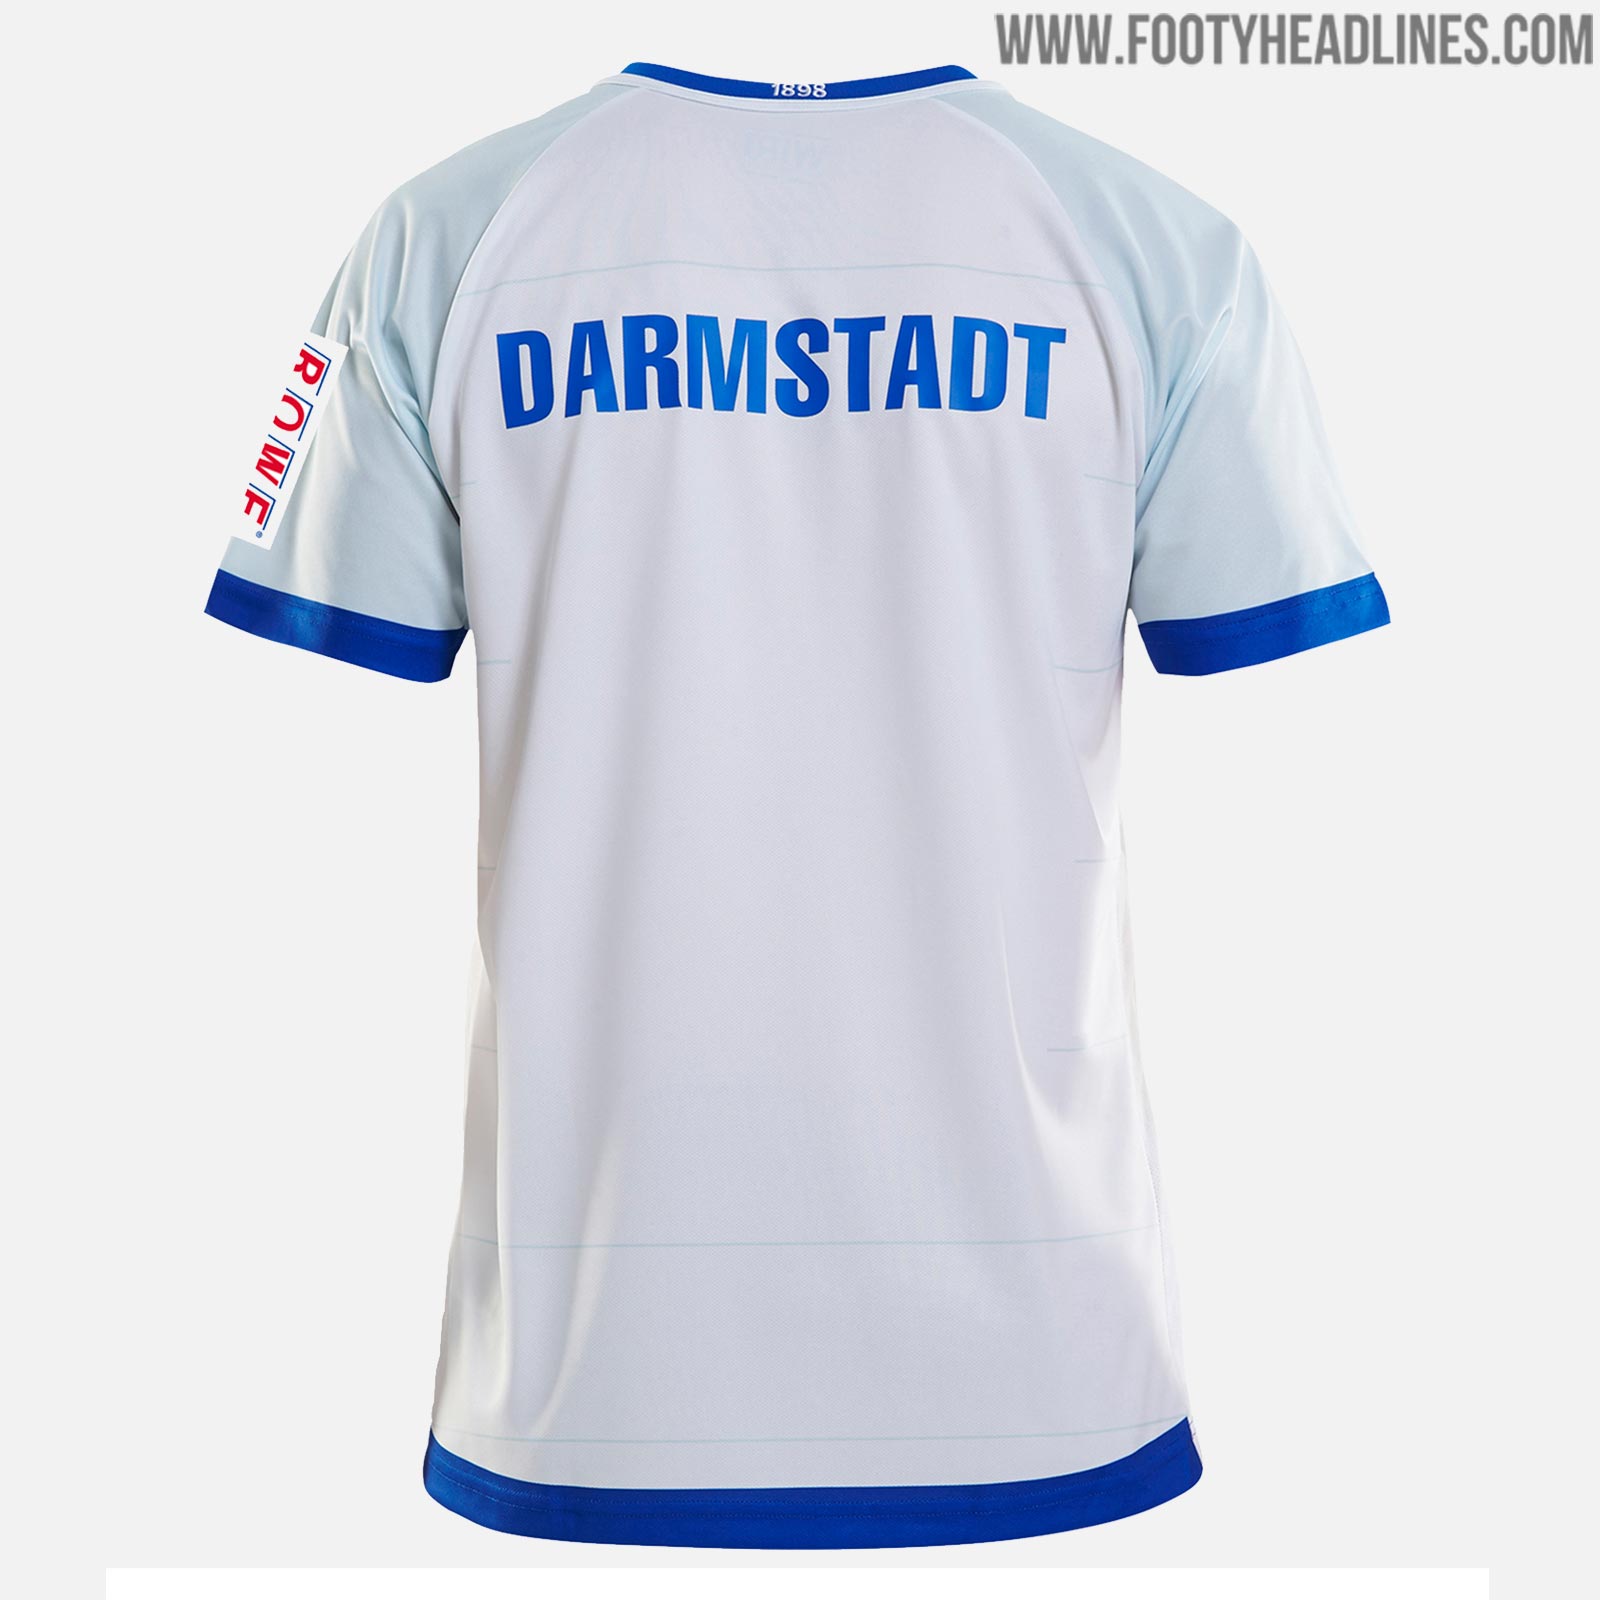 No More Jako - Craft Darmstadt 18-19 Home, Away & Third Kits Released ...